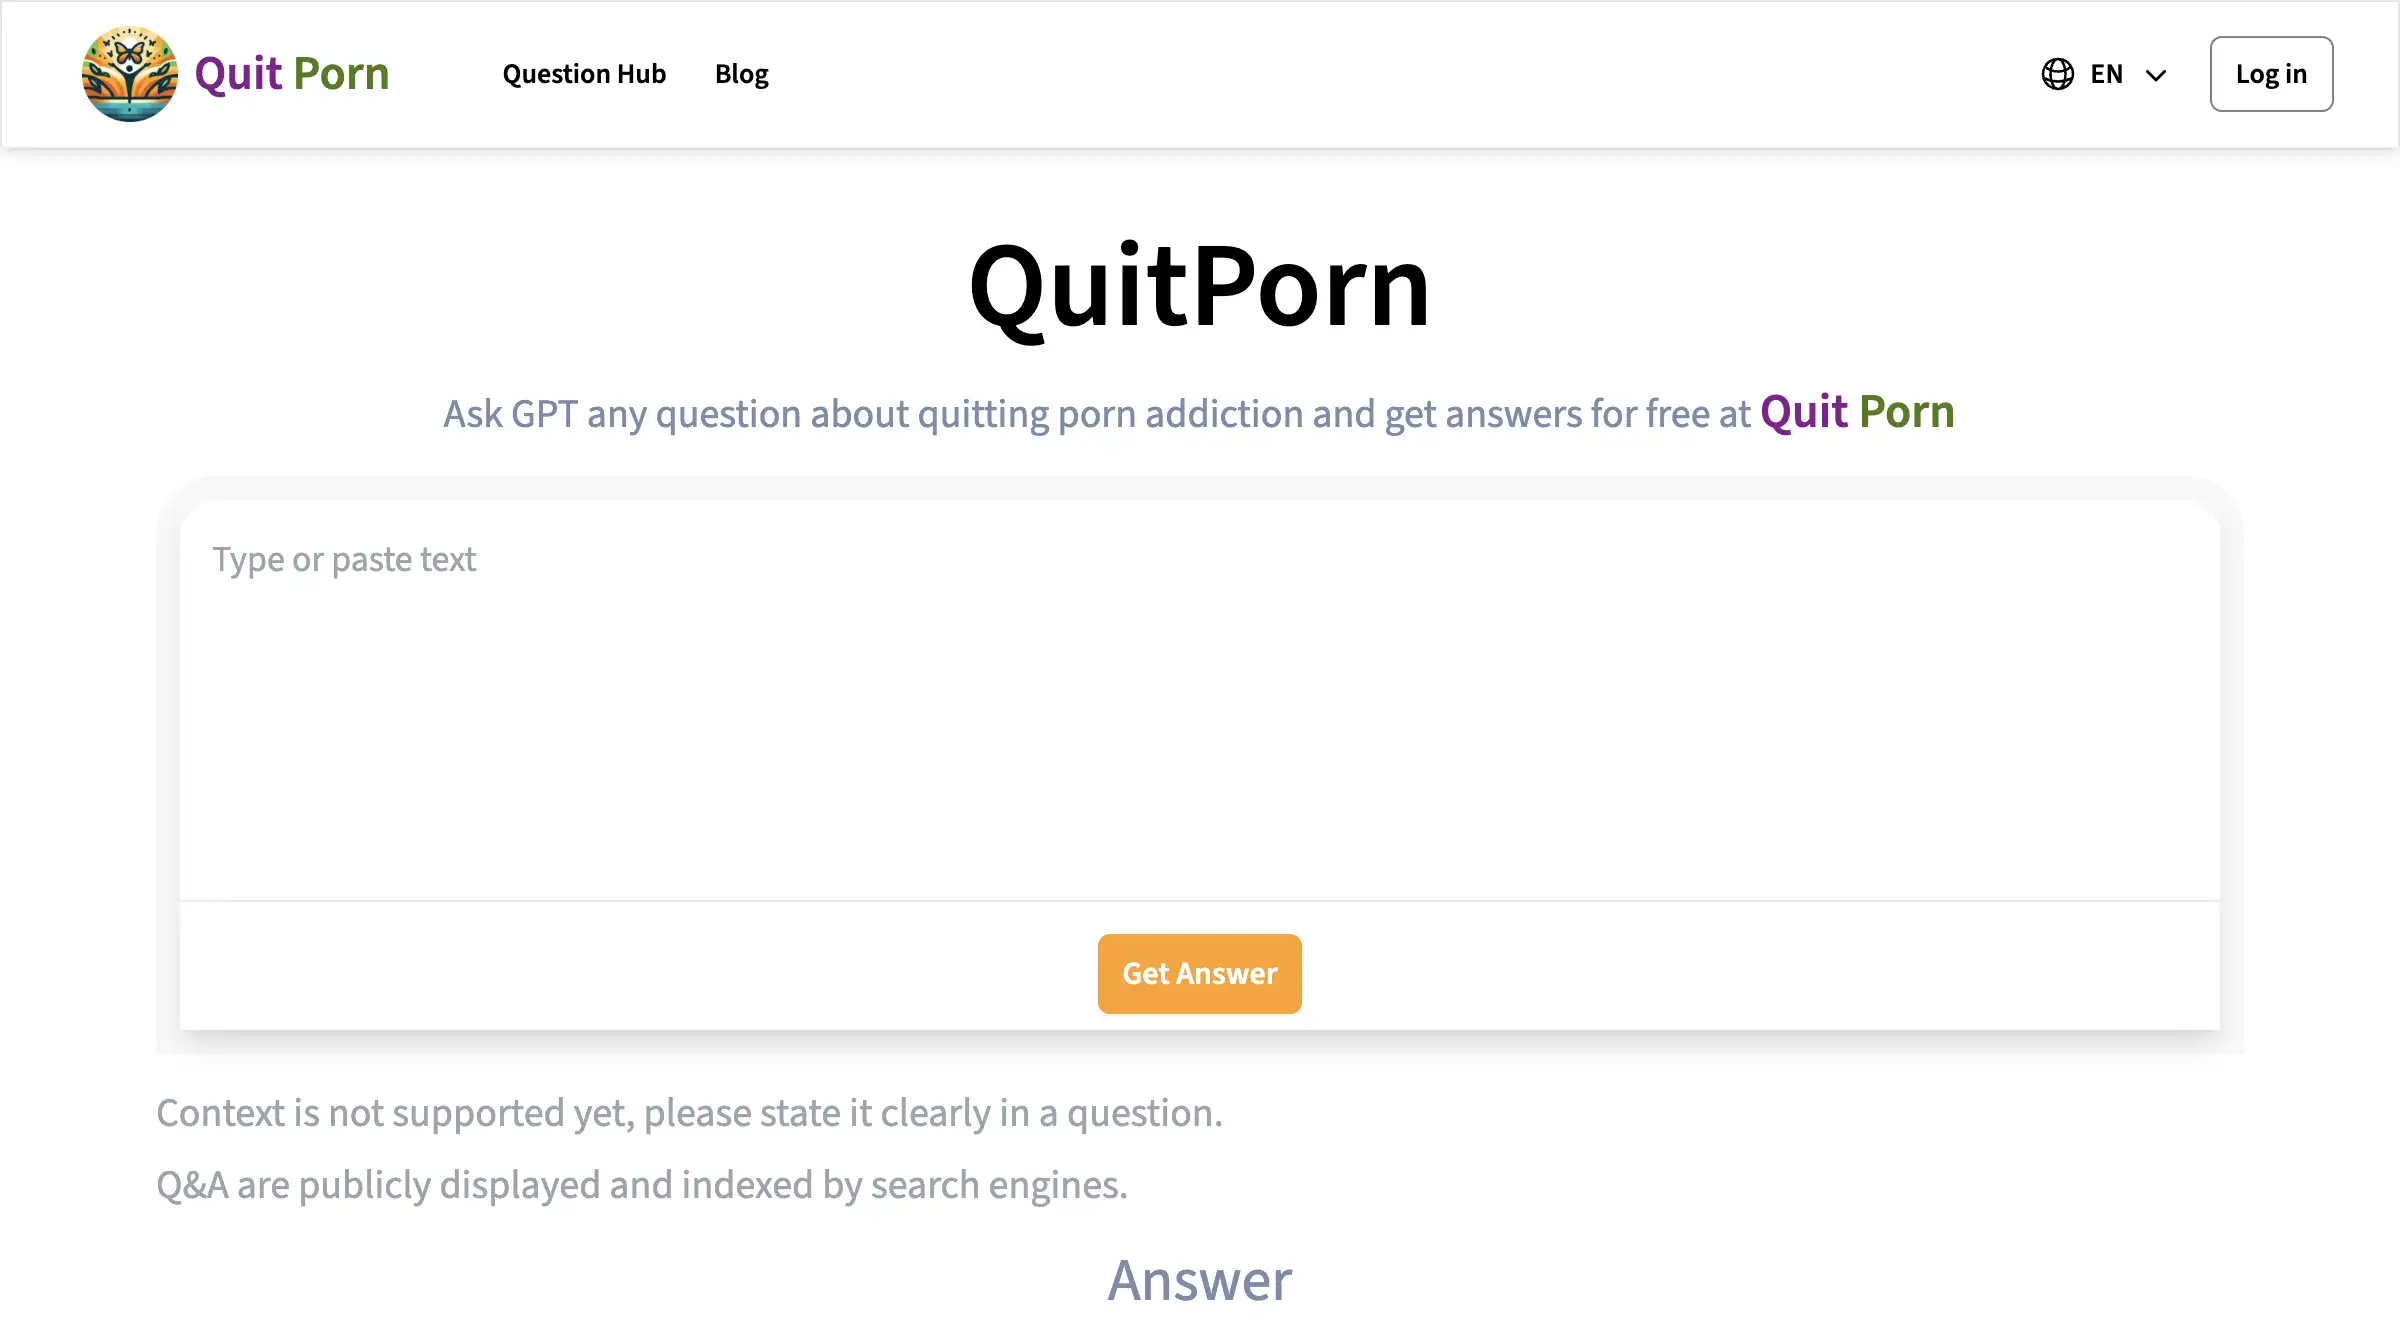 Free GPT Client to Help You Quit Porn Addiction